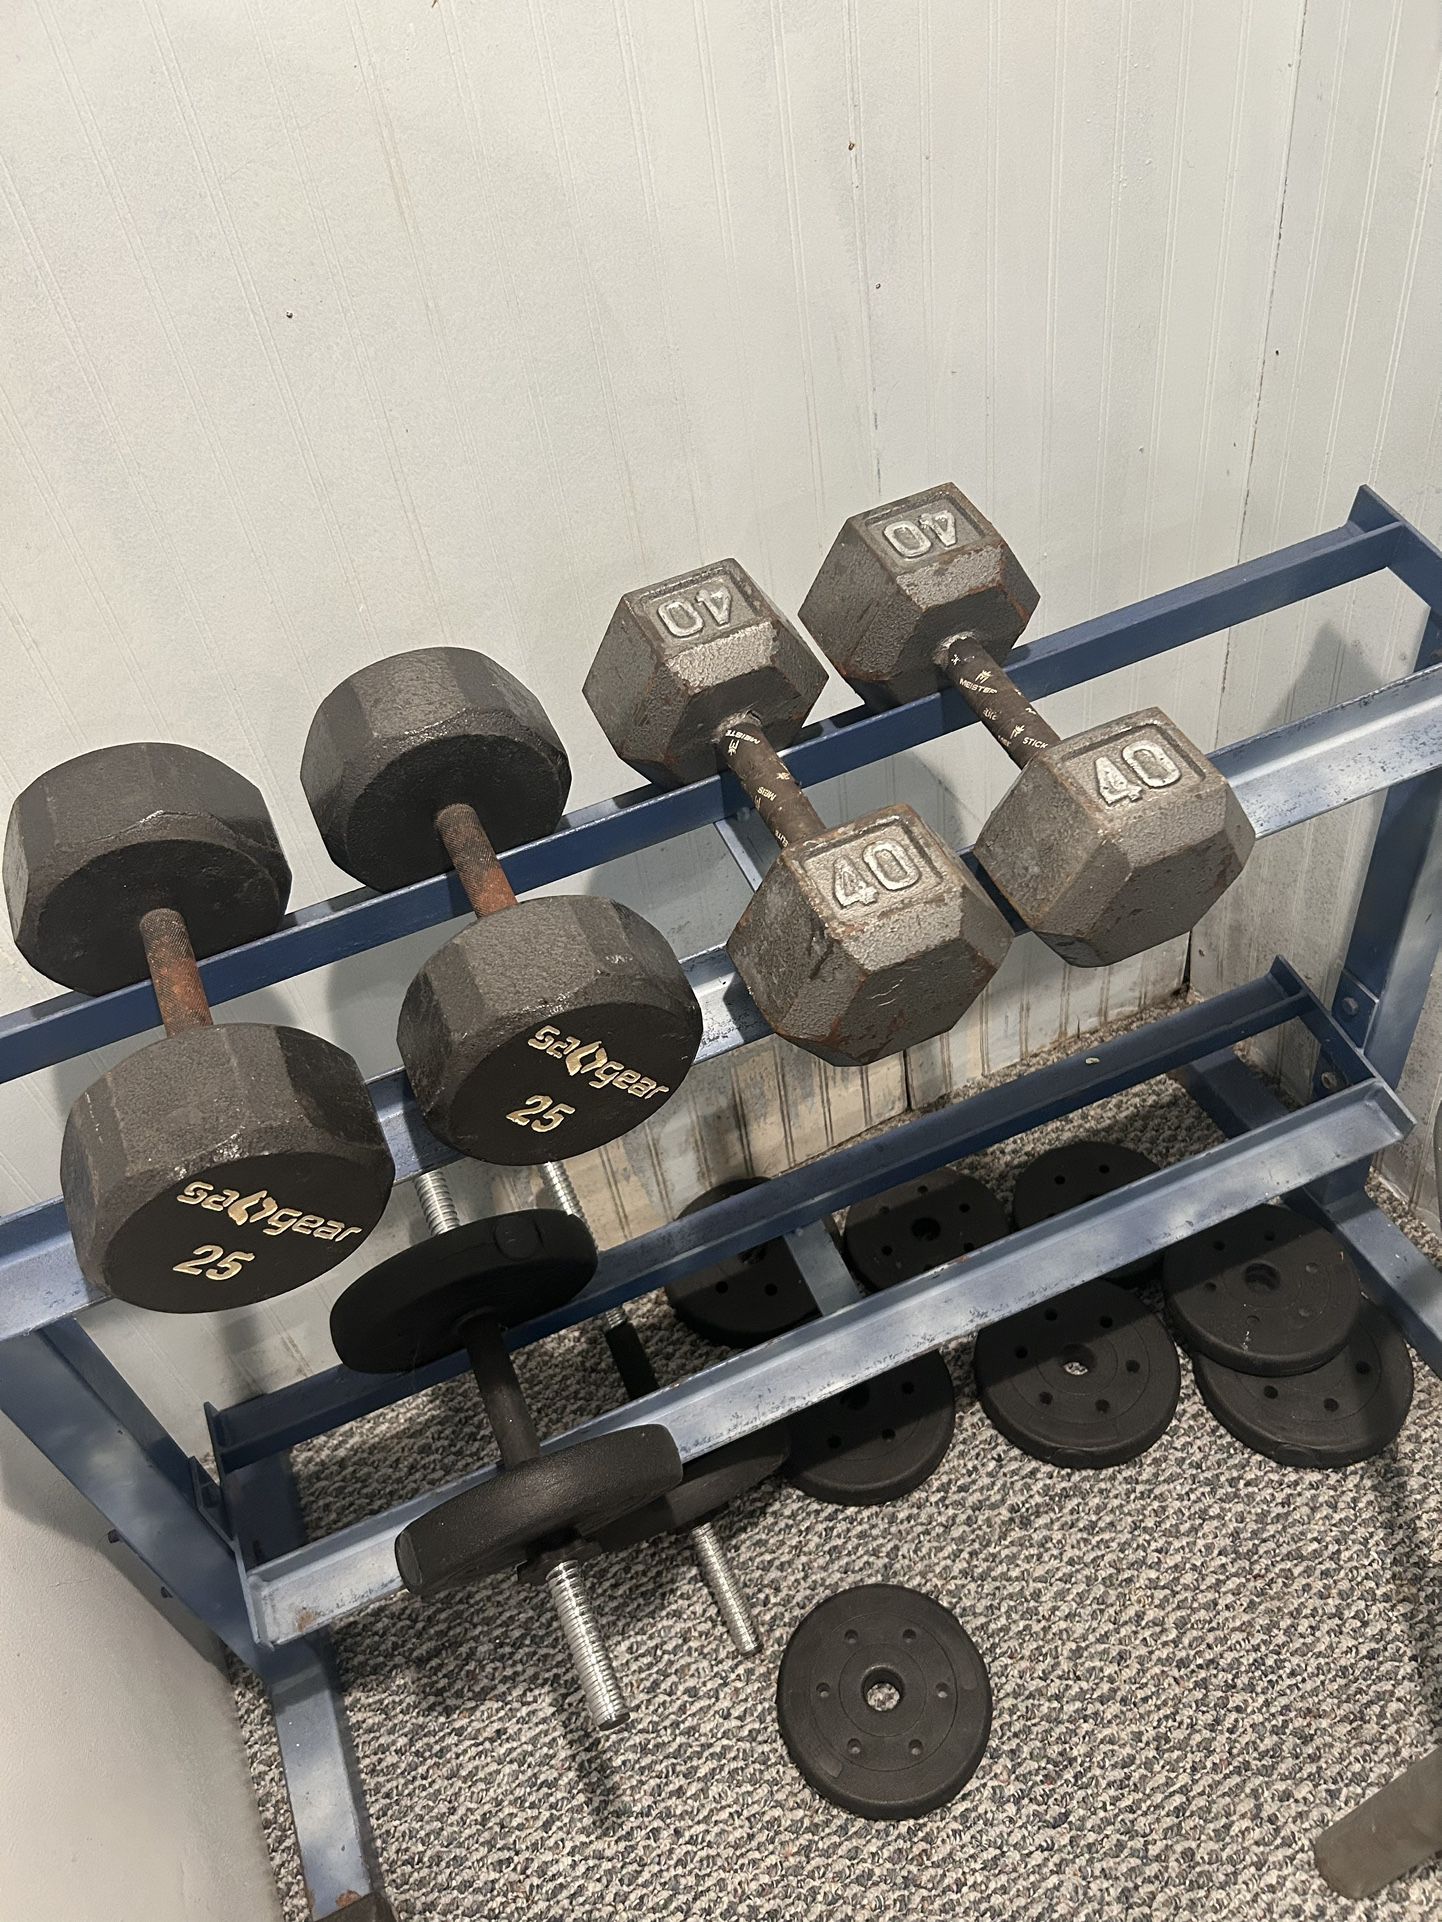 Weight rack, one set of 25 lb dumb bells, one set of 40 lb dumb bells & misc weights. $220 for everything. Pick up in southampton, pa